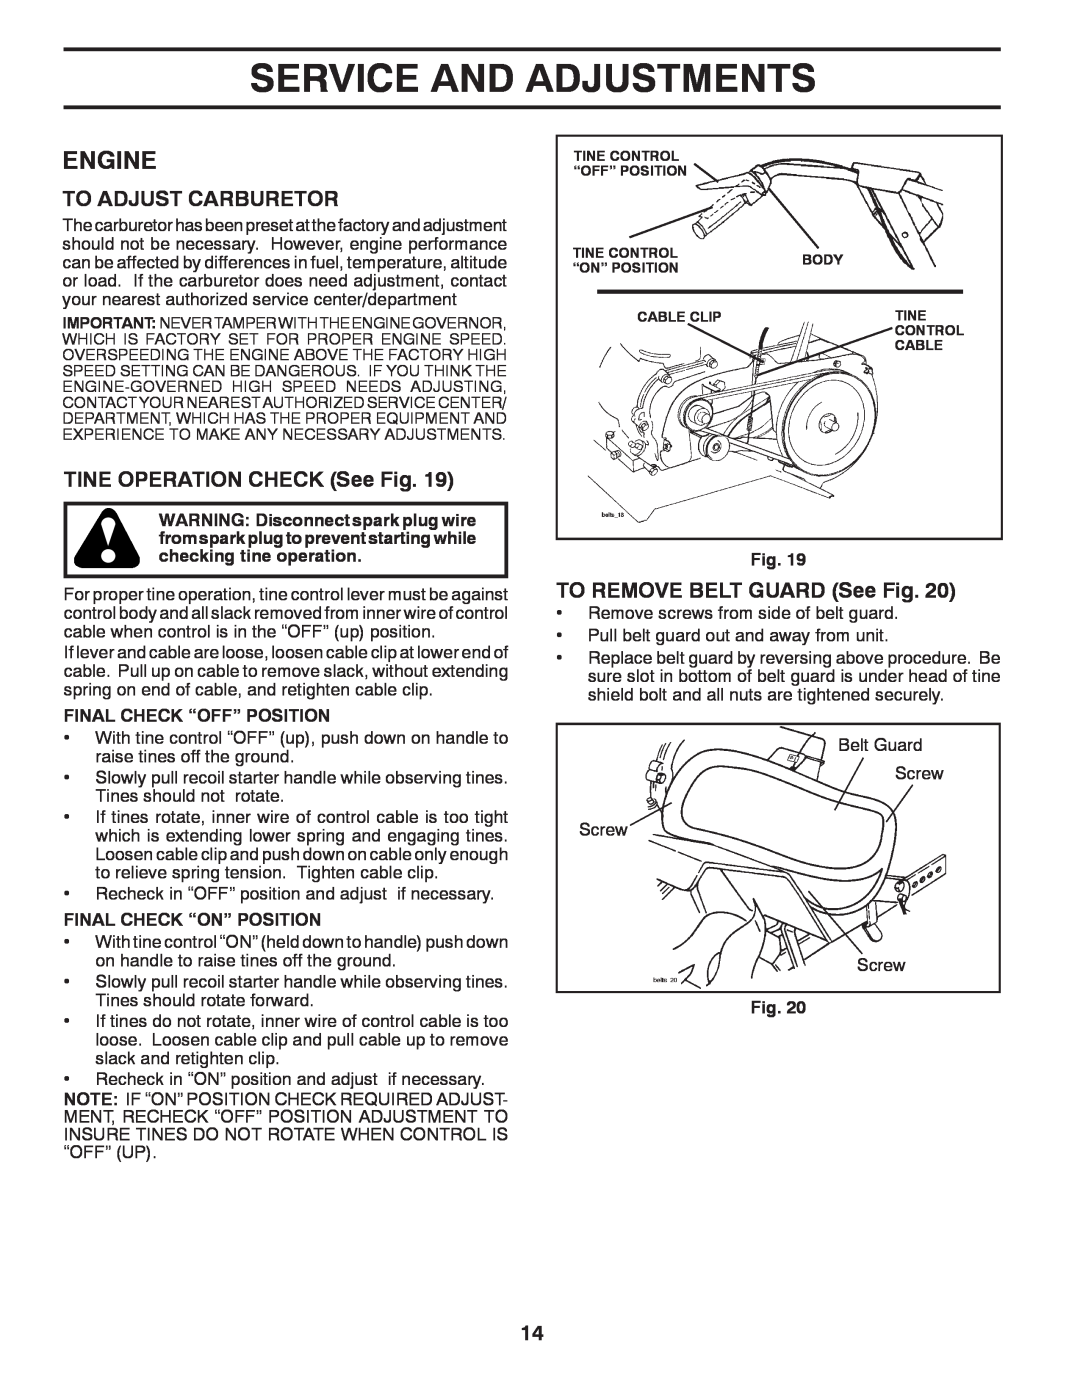 Poulan HDF900 To Adjust Carburetor, TINE OPERATION CHECK See Fig, TO REMOVE BELT GUARD See Fig, Final Check “Off” Position 